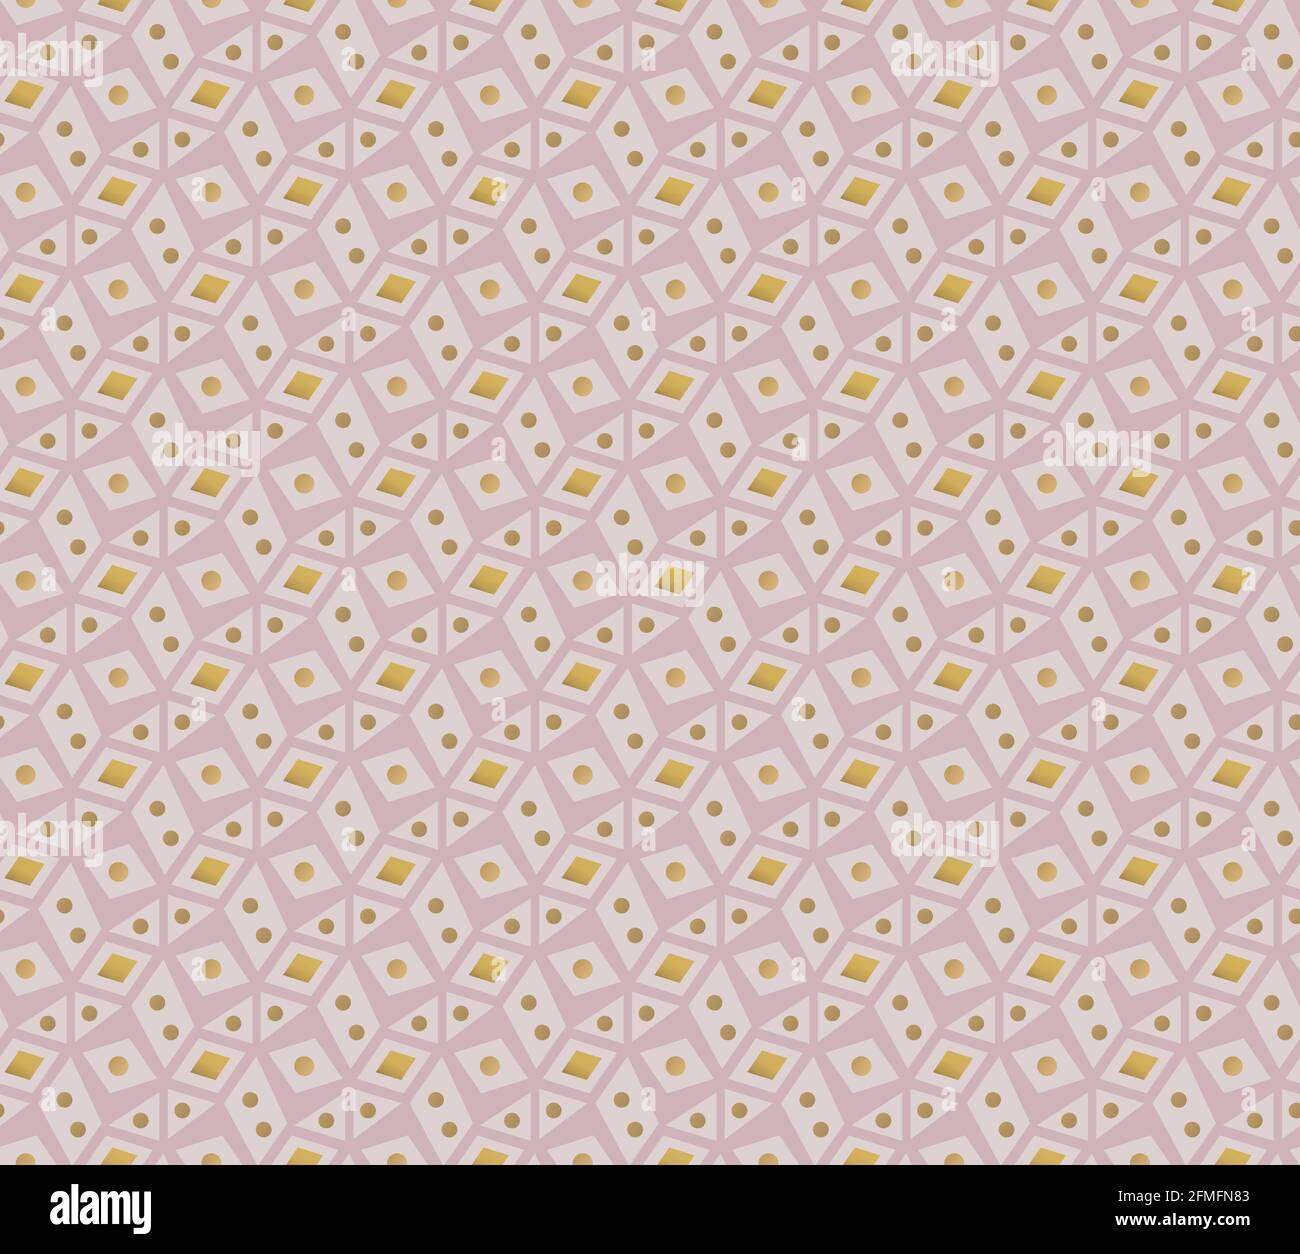 Pink geometry and, gold dots. Seamless abstract pattern. Vector illustration Stock Vector